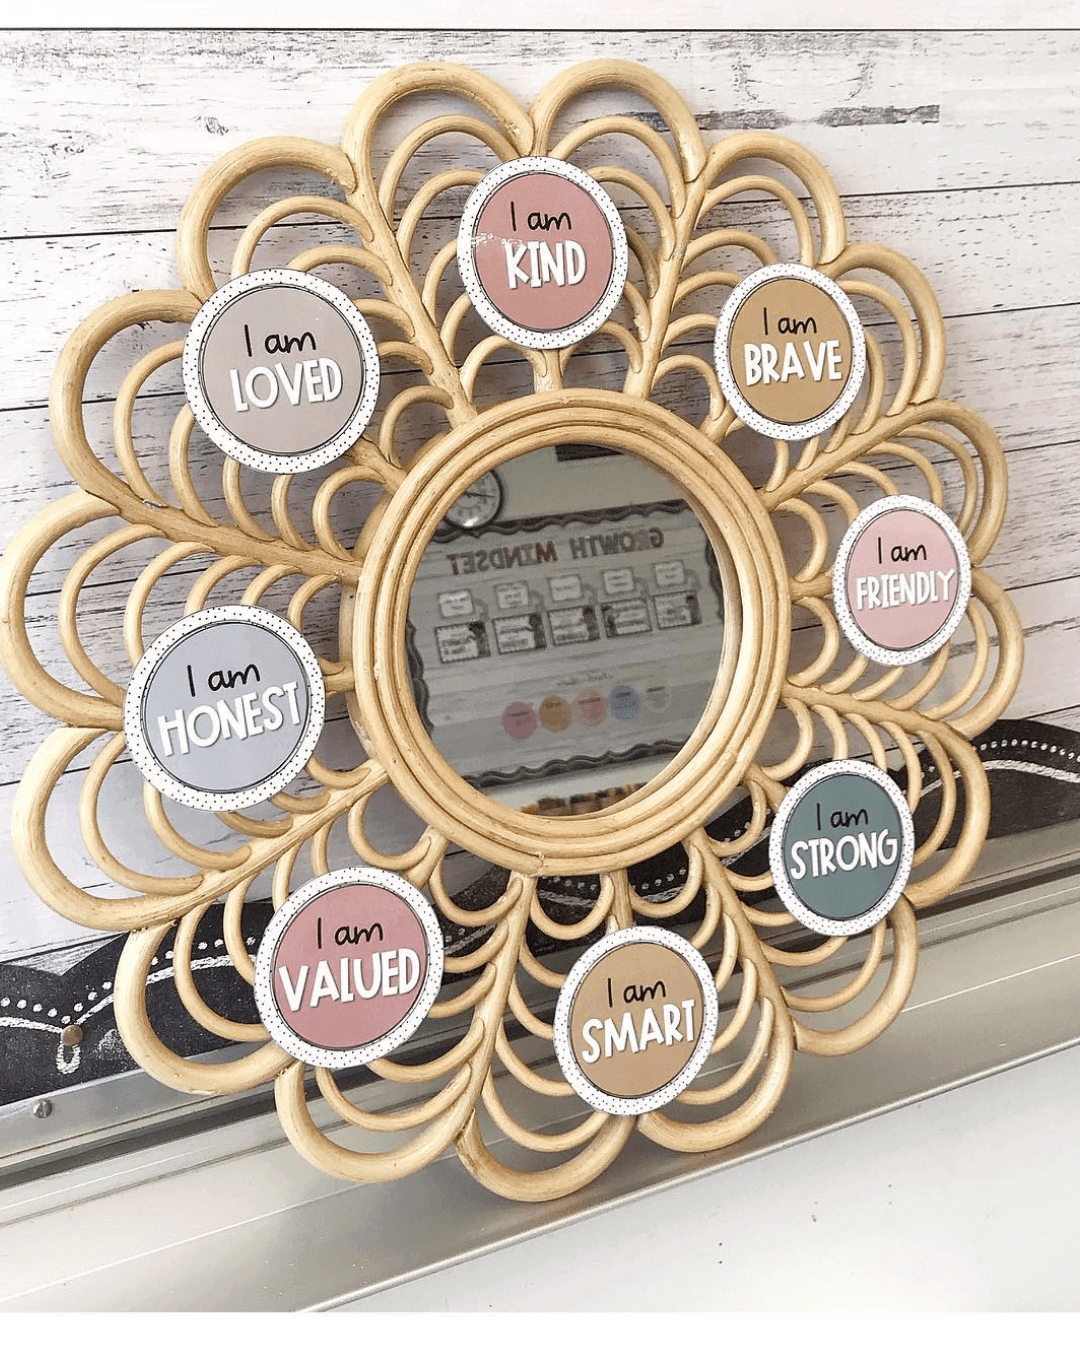 The left image shows a birthday display from the Boho Vibes range. It’s the months of the year in a bunting formation, pinned to a timber looking backing paper. The right image shows a wicker mirror with affirmation stickers affixed.